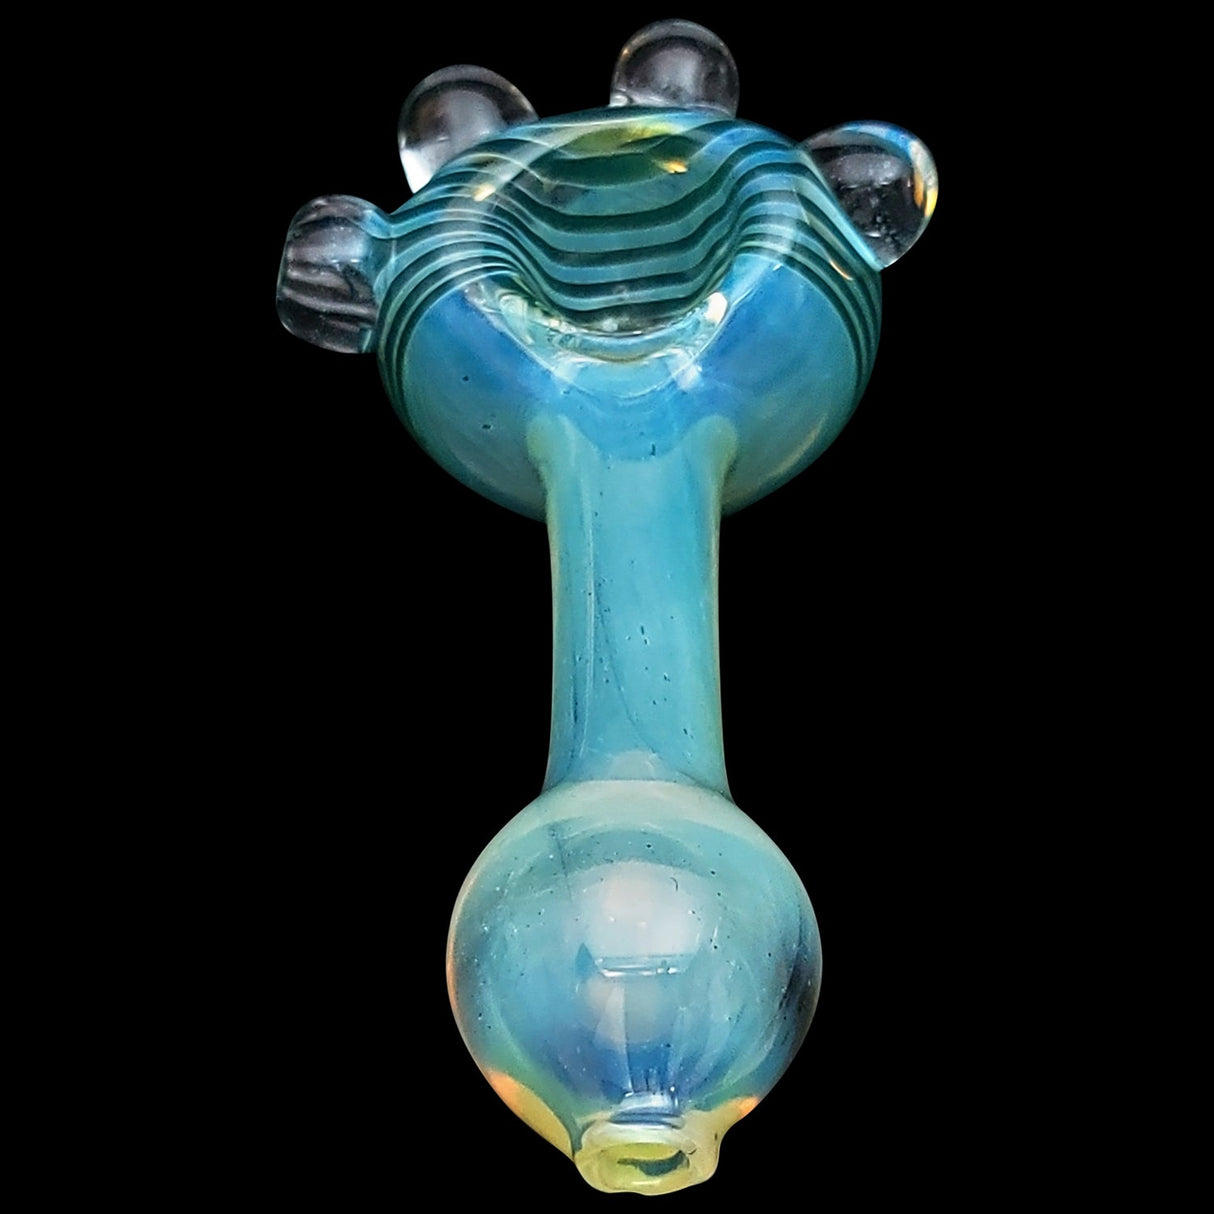 LA Pipes Spiral Marble Head Glass Spoon Pipe in Assorted Colors with Heavy Wall Design